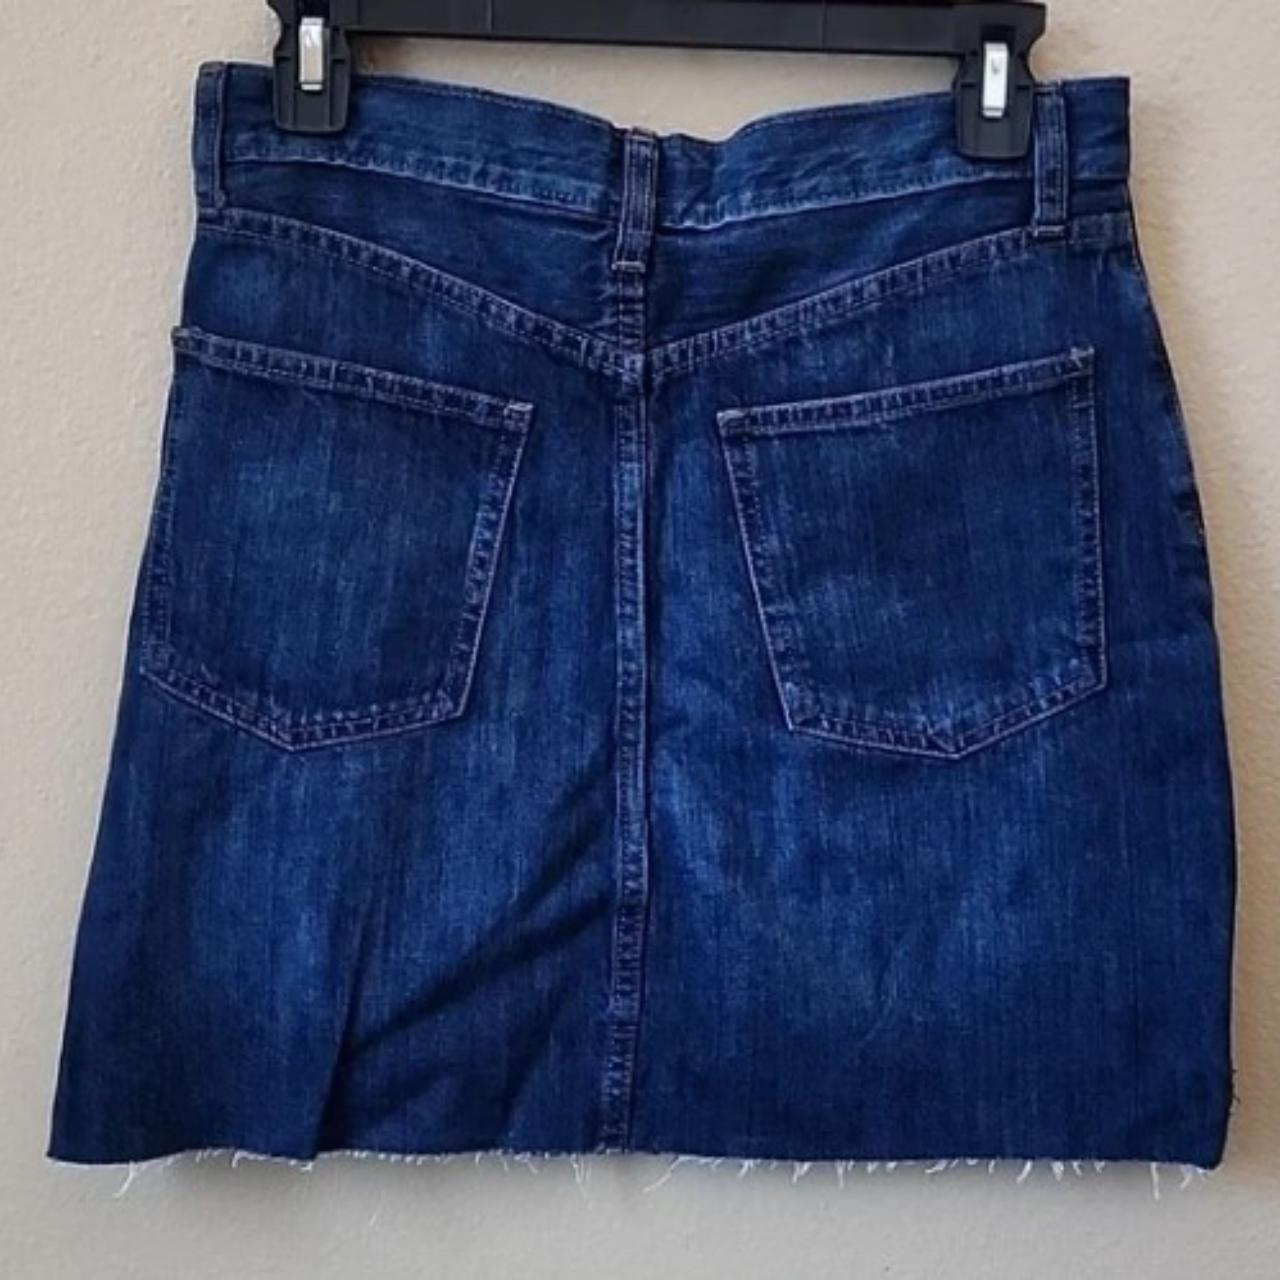 Gap Denim Skirt Button Fly Size:4 Gently used, no... - Depop